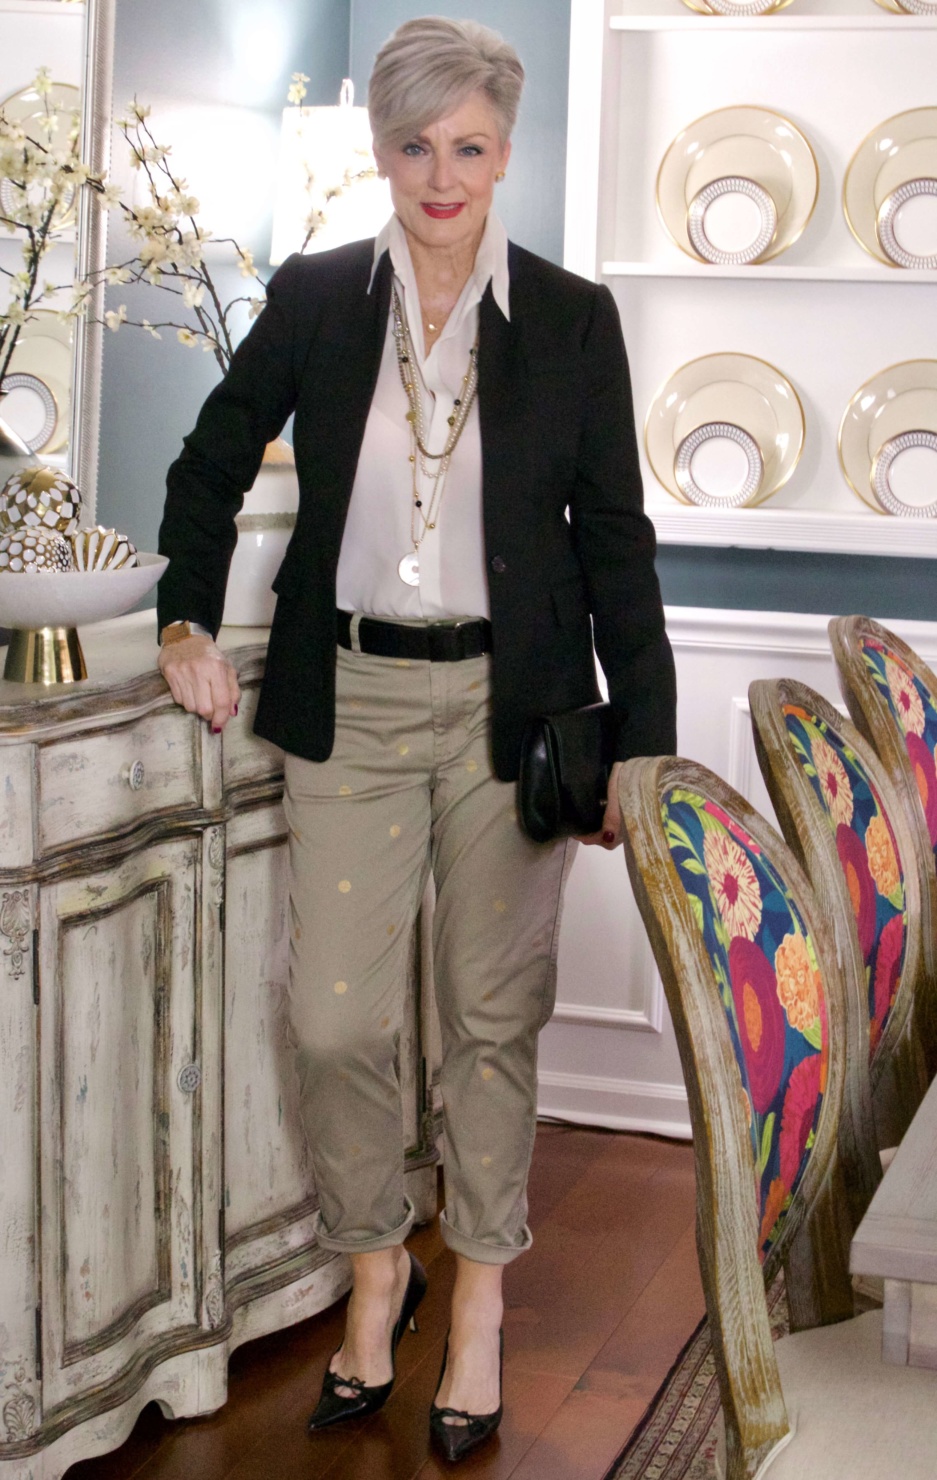 beth from Style at a Certain Age wears J.Crew chinos, black blazer, ivory silk blouse, black pumps and black clutch handbag